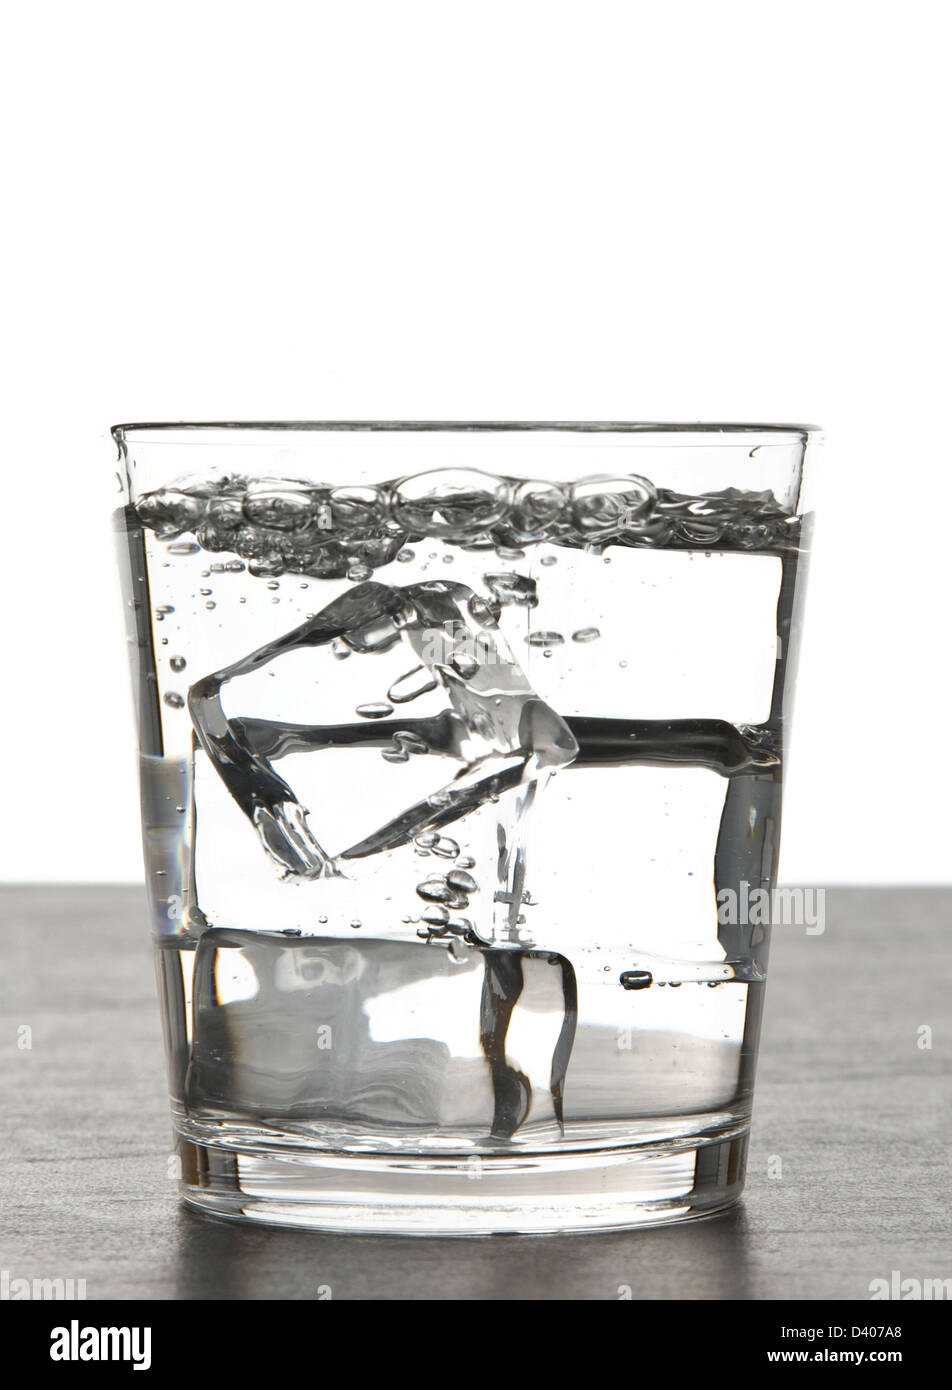 https://c8.alamy.com/comp/D407A8/glass-of-water-over-ice-cubes-with-white-background-D407A8.jpg